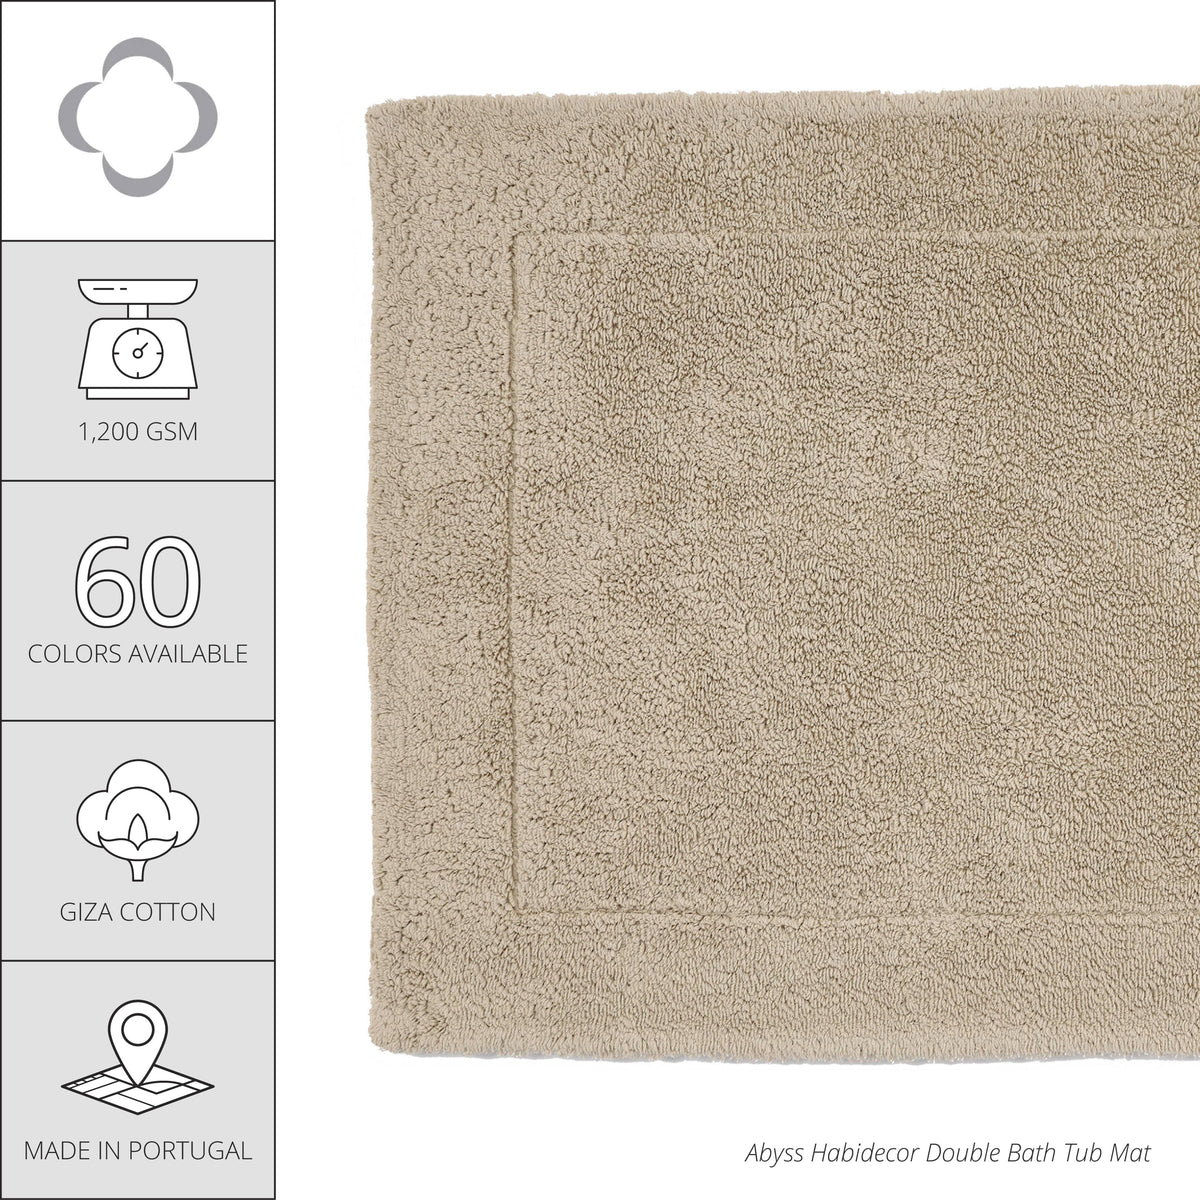 Abyss Double Bath Tub Mat - Taupe (711)